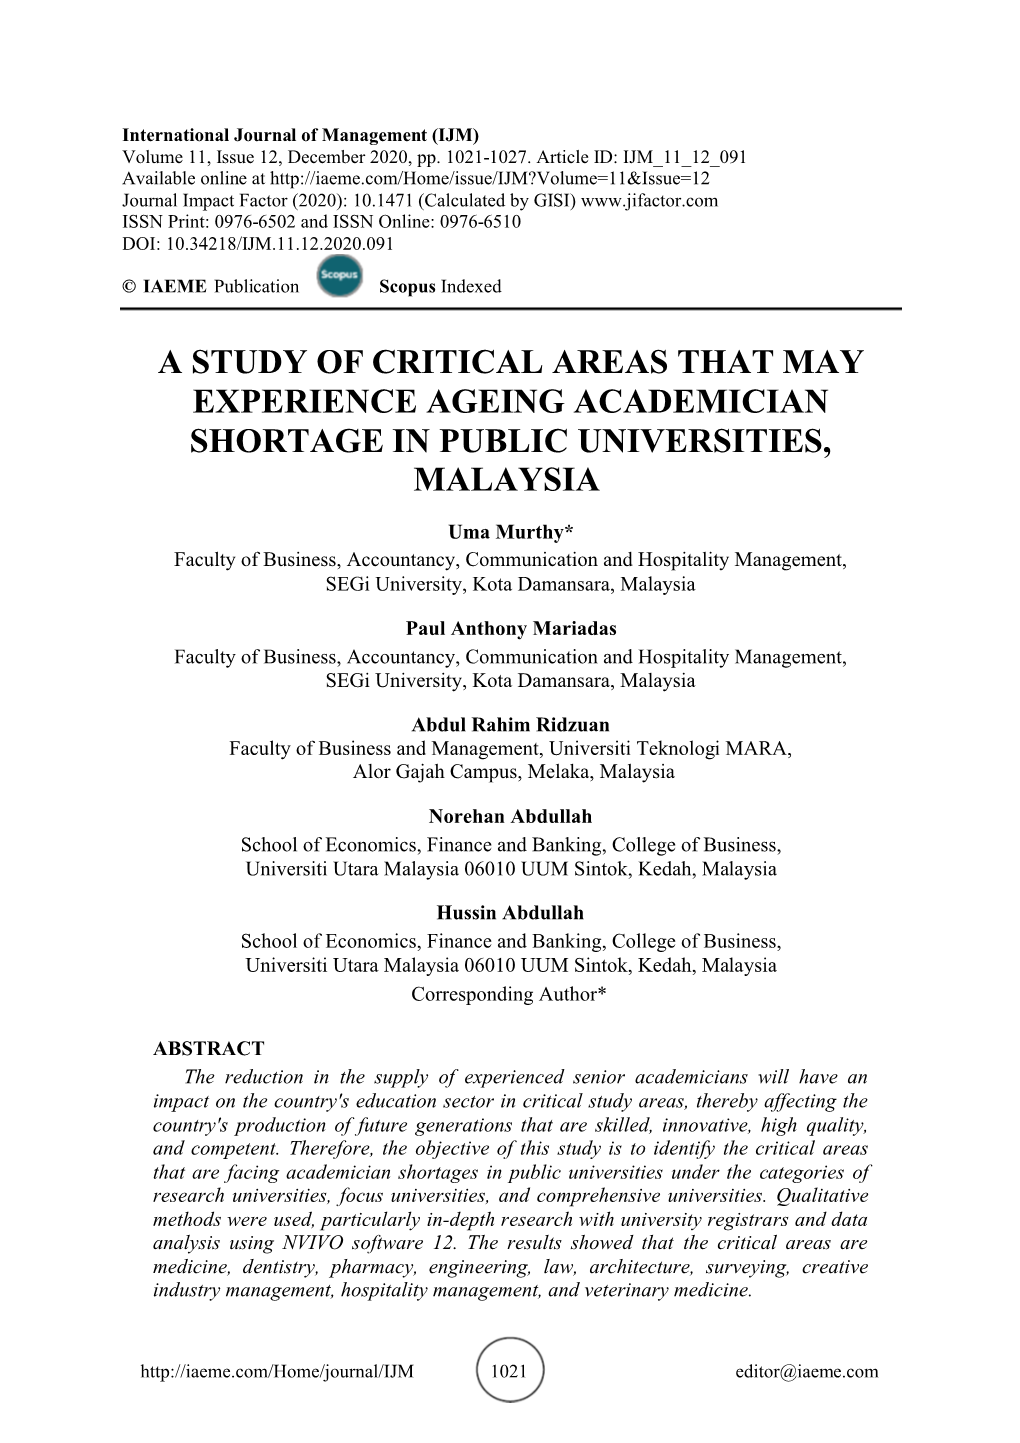 A Study of Critical Areas That May Experience Ageing Academician Shortage in Public Universities, Malaysia